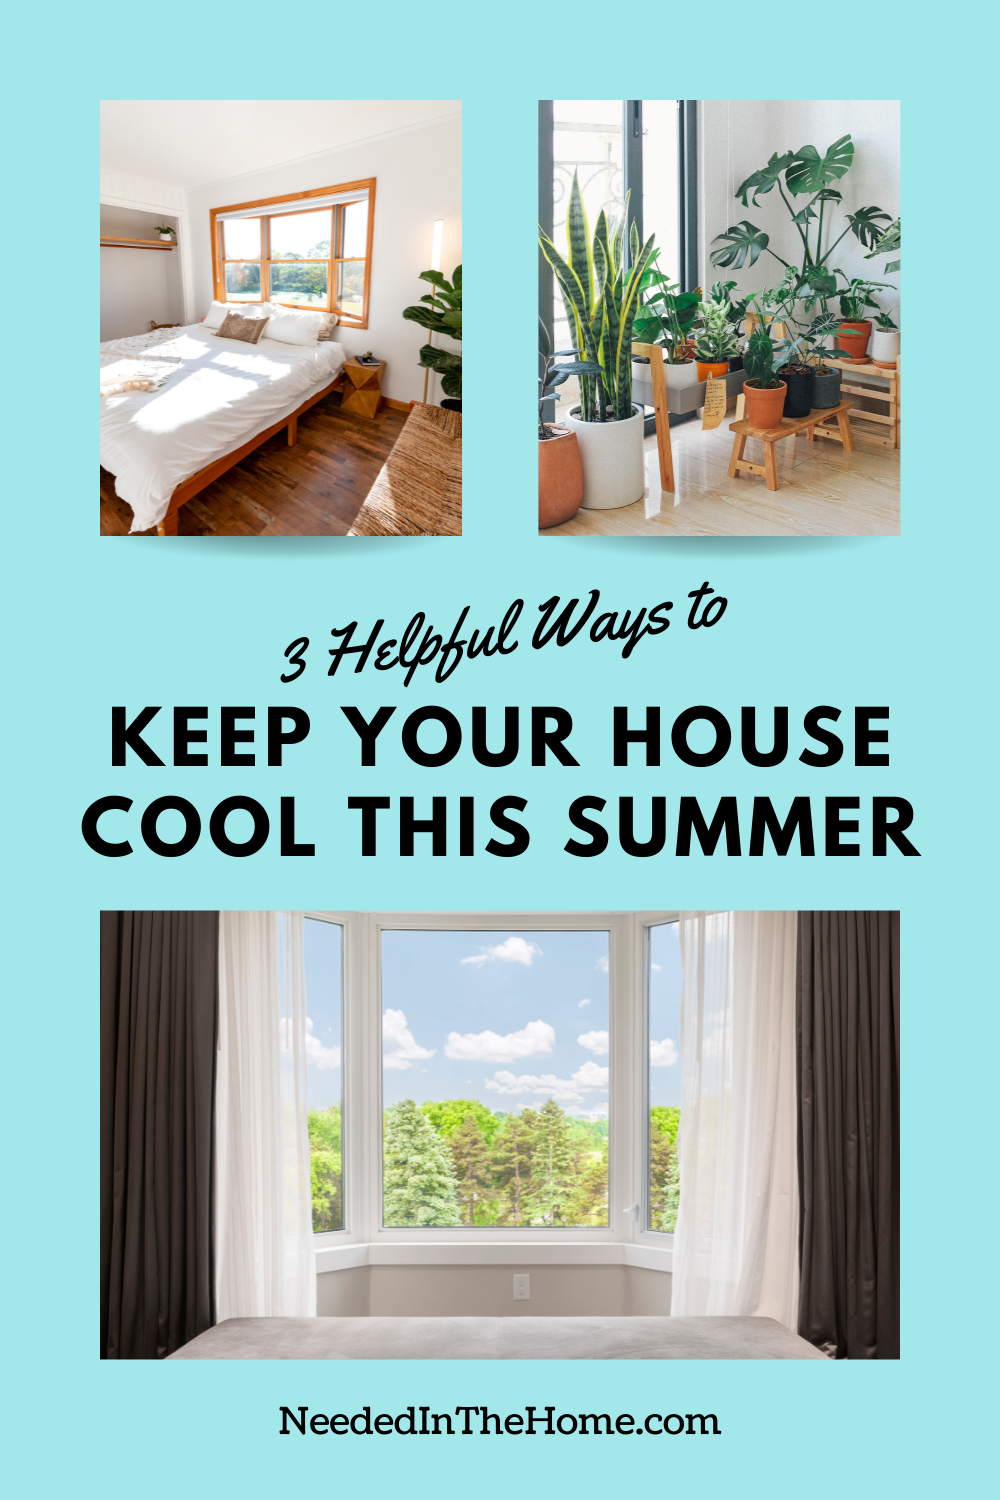 pinterest-pin-description 3 helpful ways to keep your house cool this summer bedroom plants bay window neededinthehome